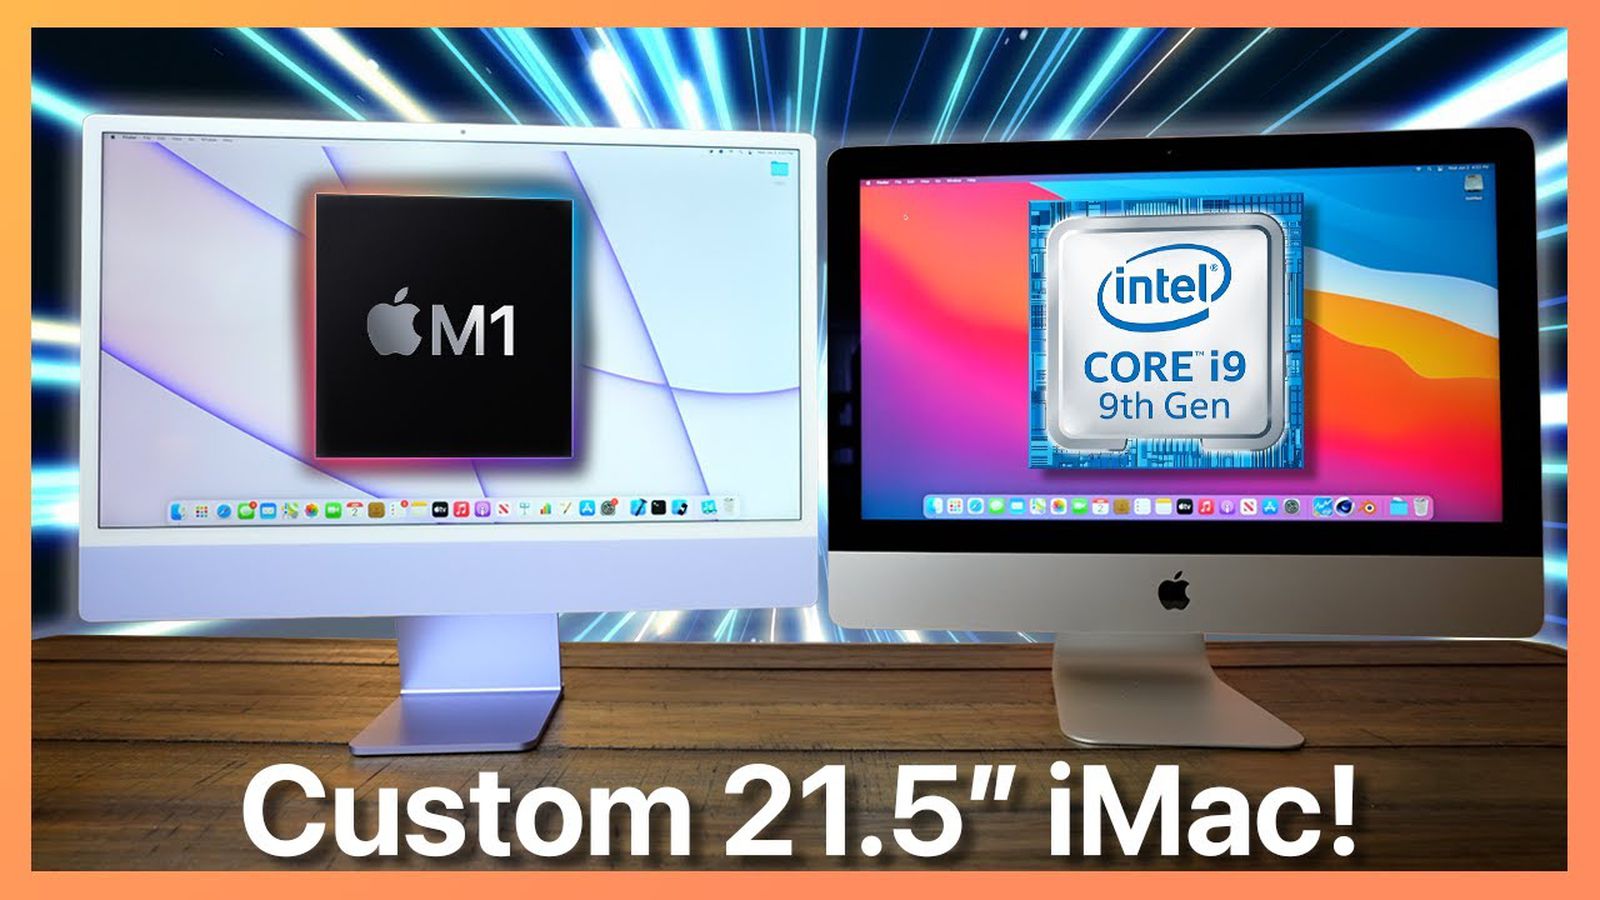 Custom Built 21.5-inch iMac with Intel Core i9 Outperforms 24-inch